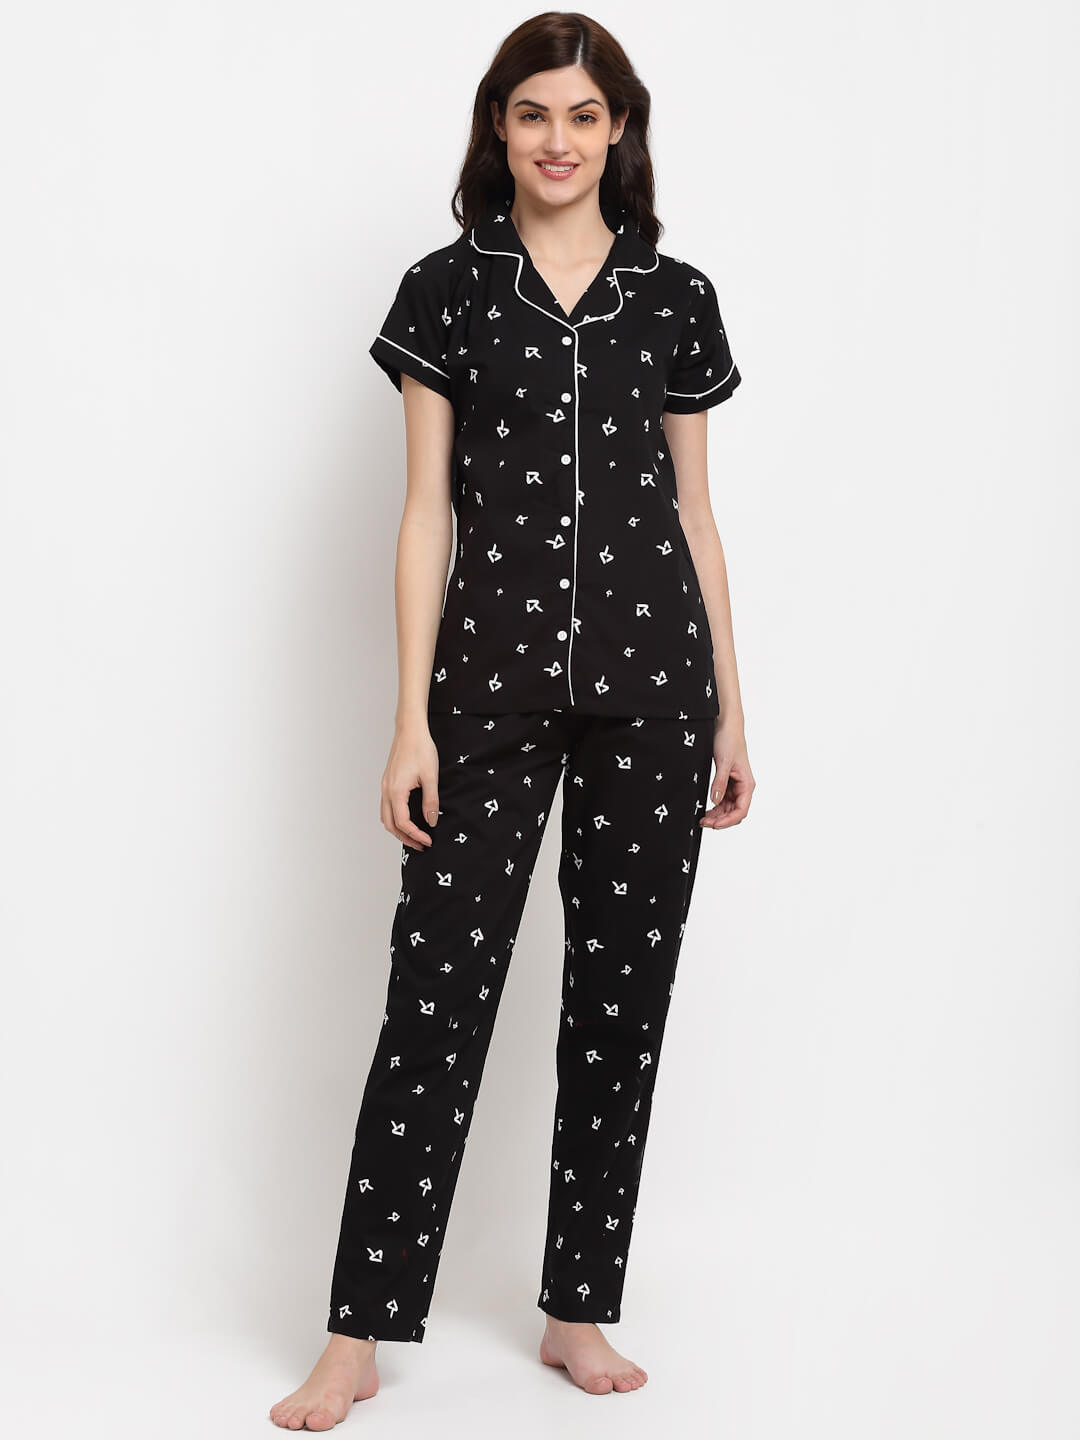 Black Color Abstract Printed Cotton Nightsuit For Women Claura Designs Pvt. Ltd. Nightsuit Abstract Printed, Black, Cotton, Nightsuit, Short Sleeves, Sleepwear